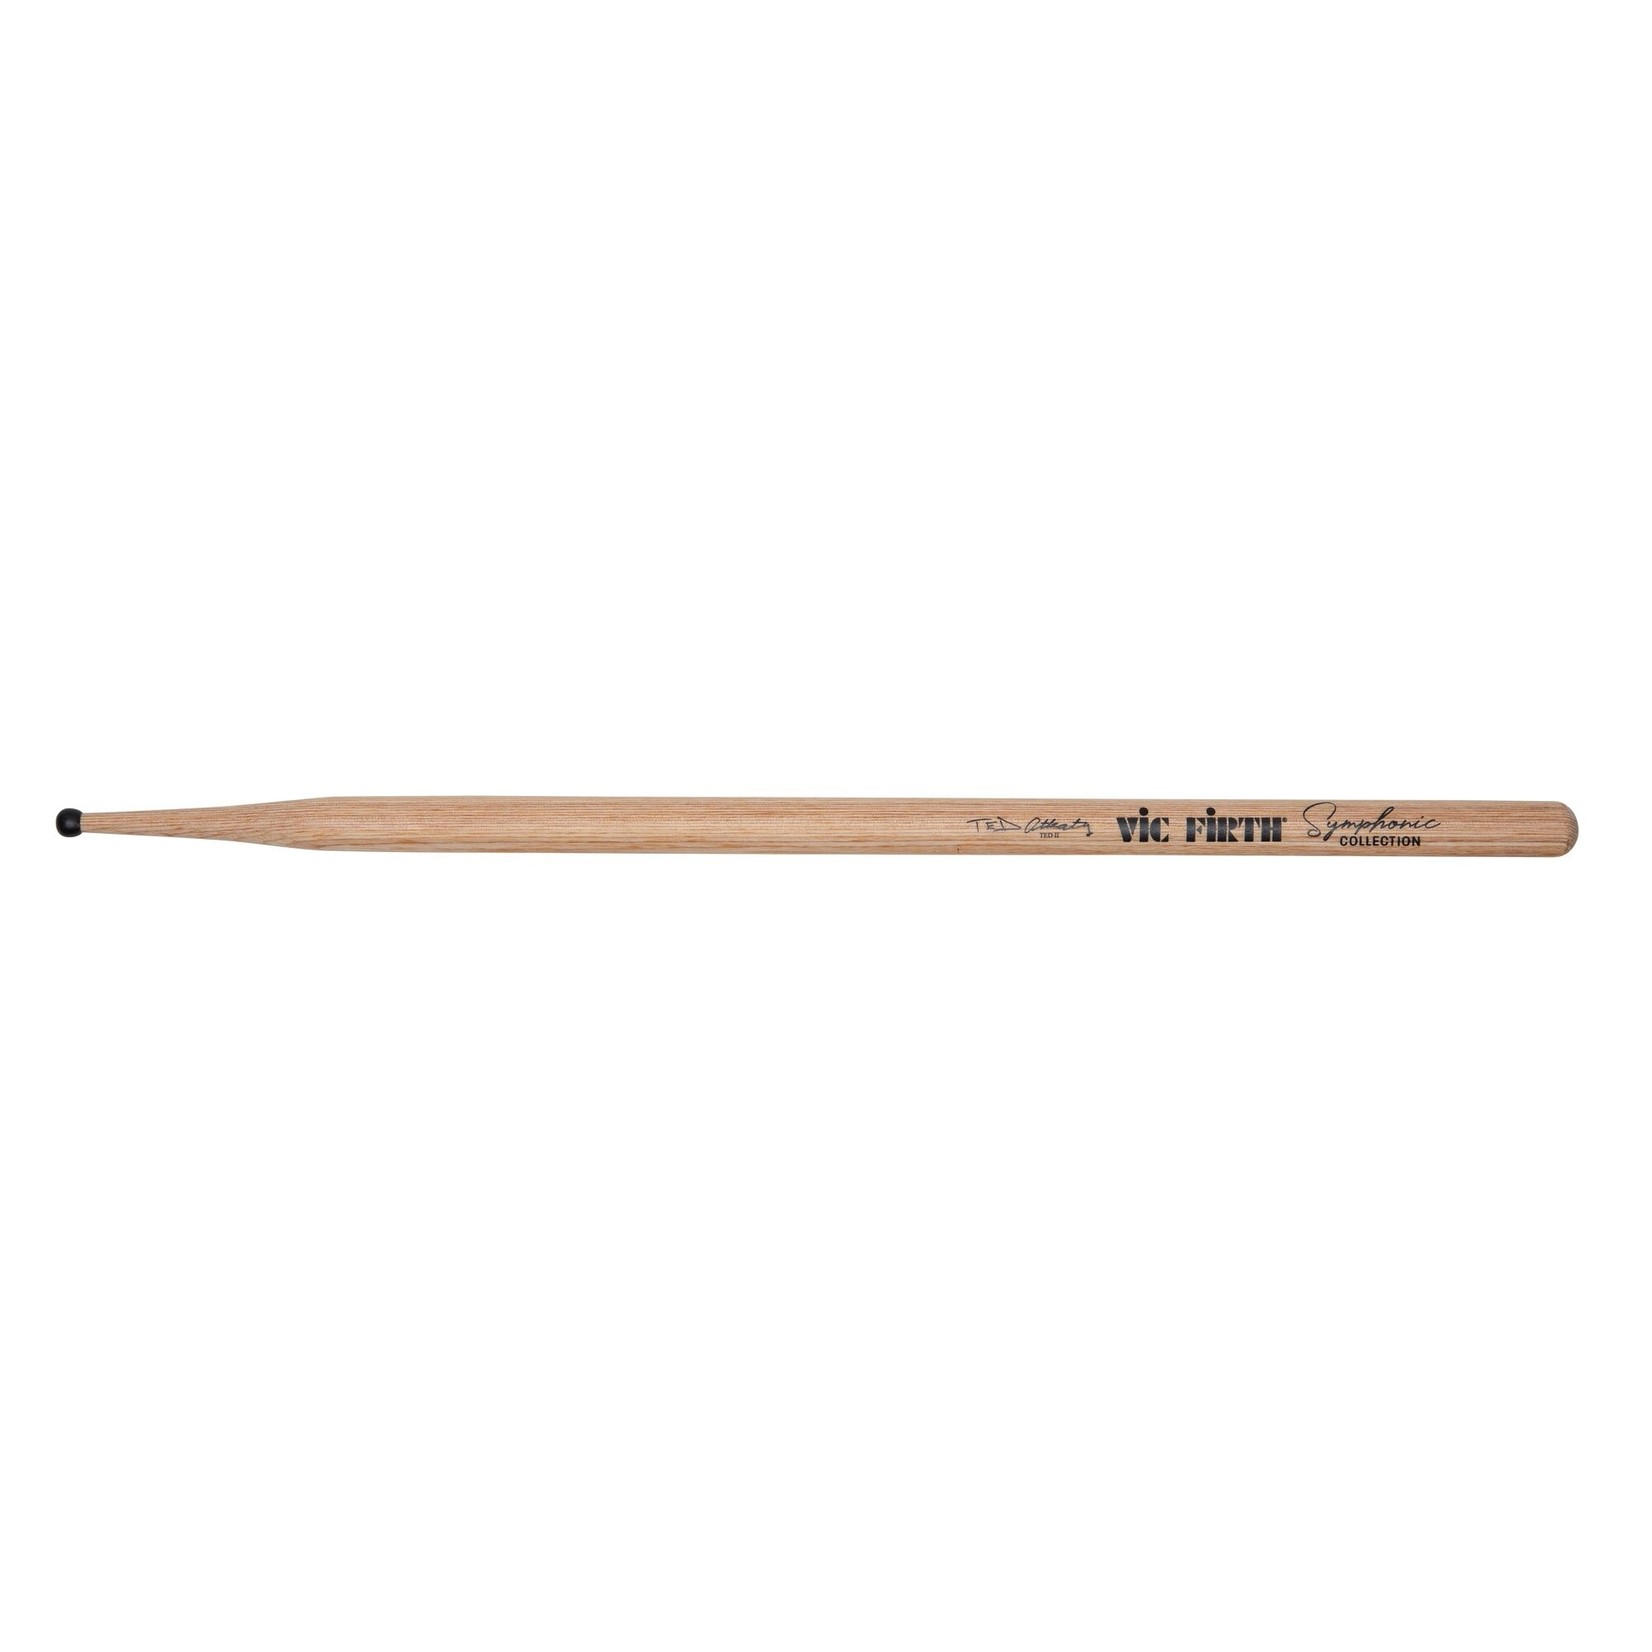 Vic Firth Vic Firth Symphonic Collection Laminated Birch Snare, Ted Atkatz II Vic Firth Signature Stick